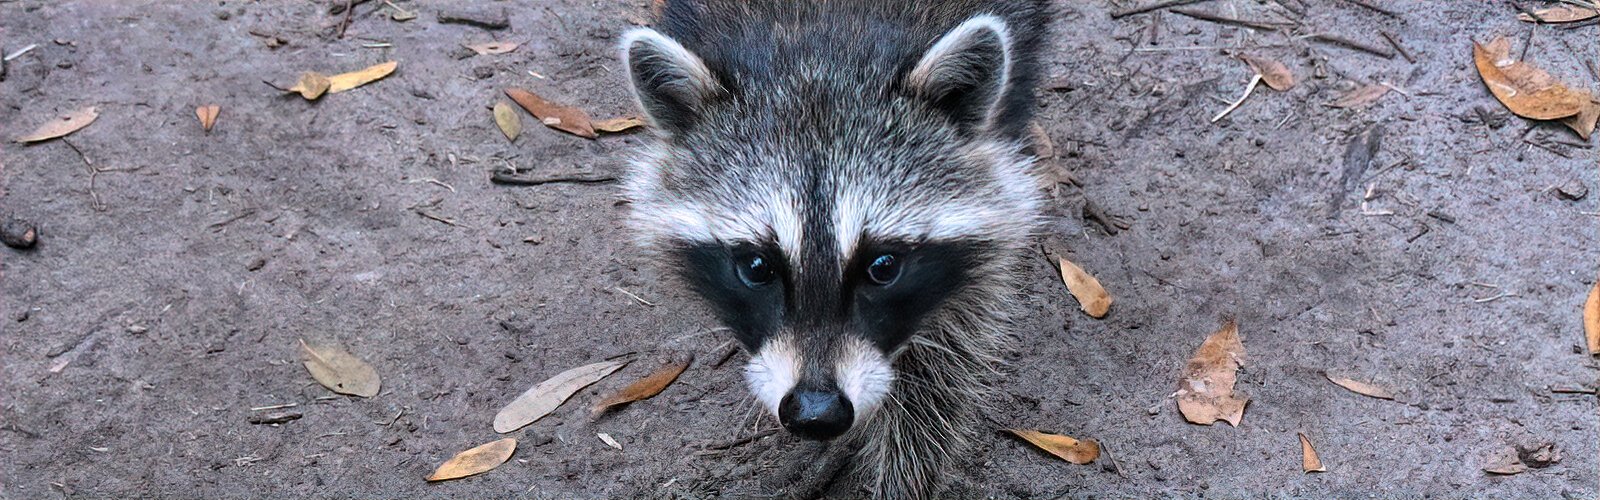 A family of raccoons resides at Circle B and it’s important not to feed them so that they keep foraging and don’t become beggars.